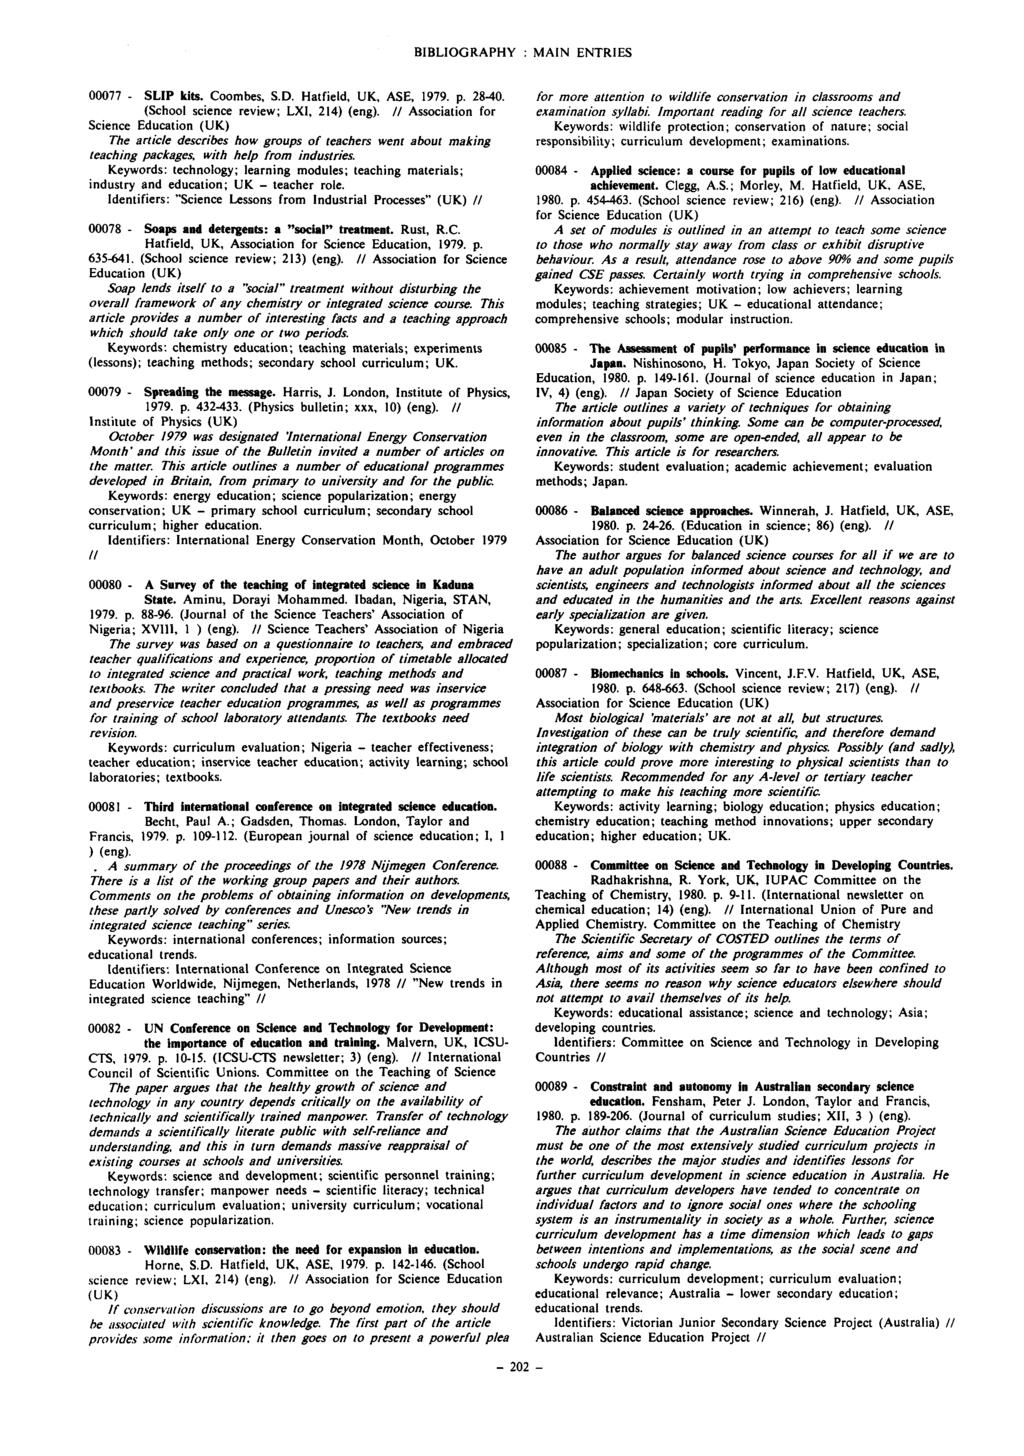 BIBLIOGRAPHY : MAIN ENTRIES 00077 - SLIP kits. Coombes, S.D. Hatfield, UK, ASE, 1979. p. 28-40. (School science review; LXI, 214) (eng).